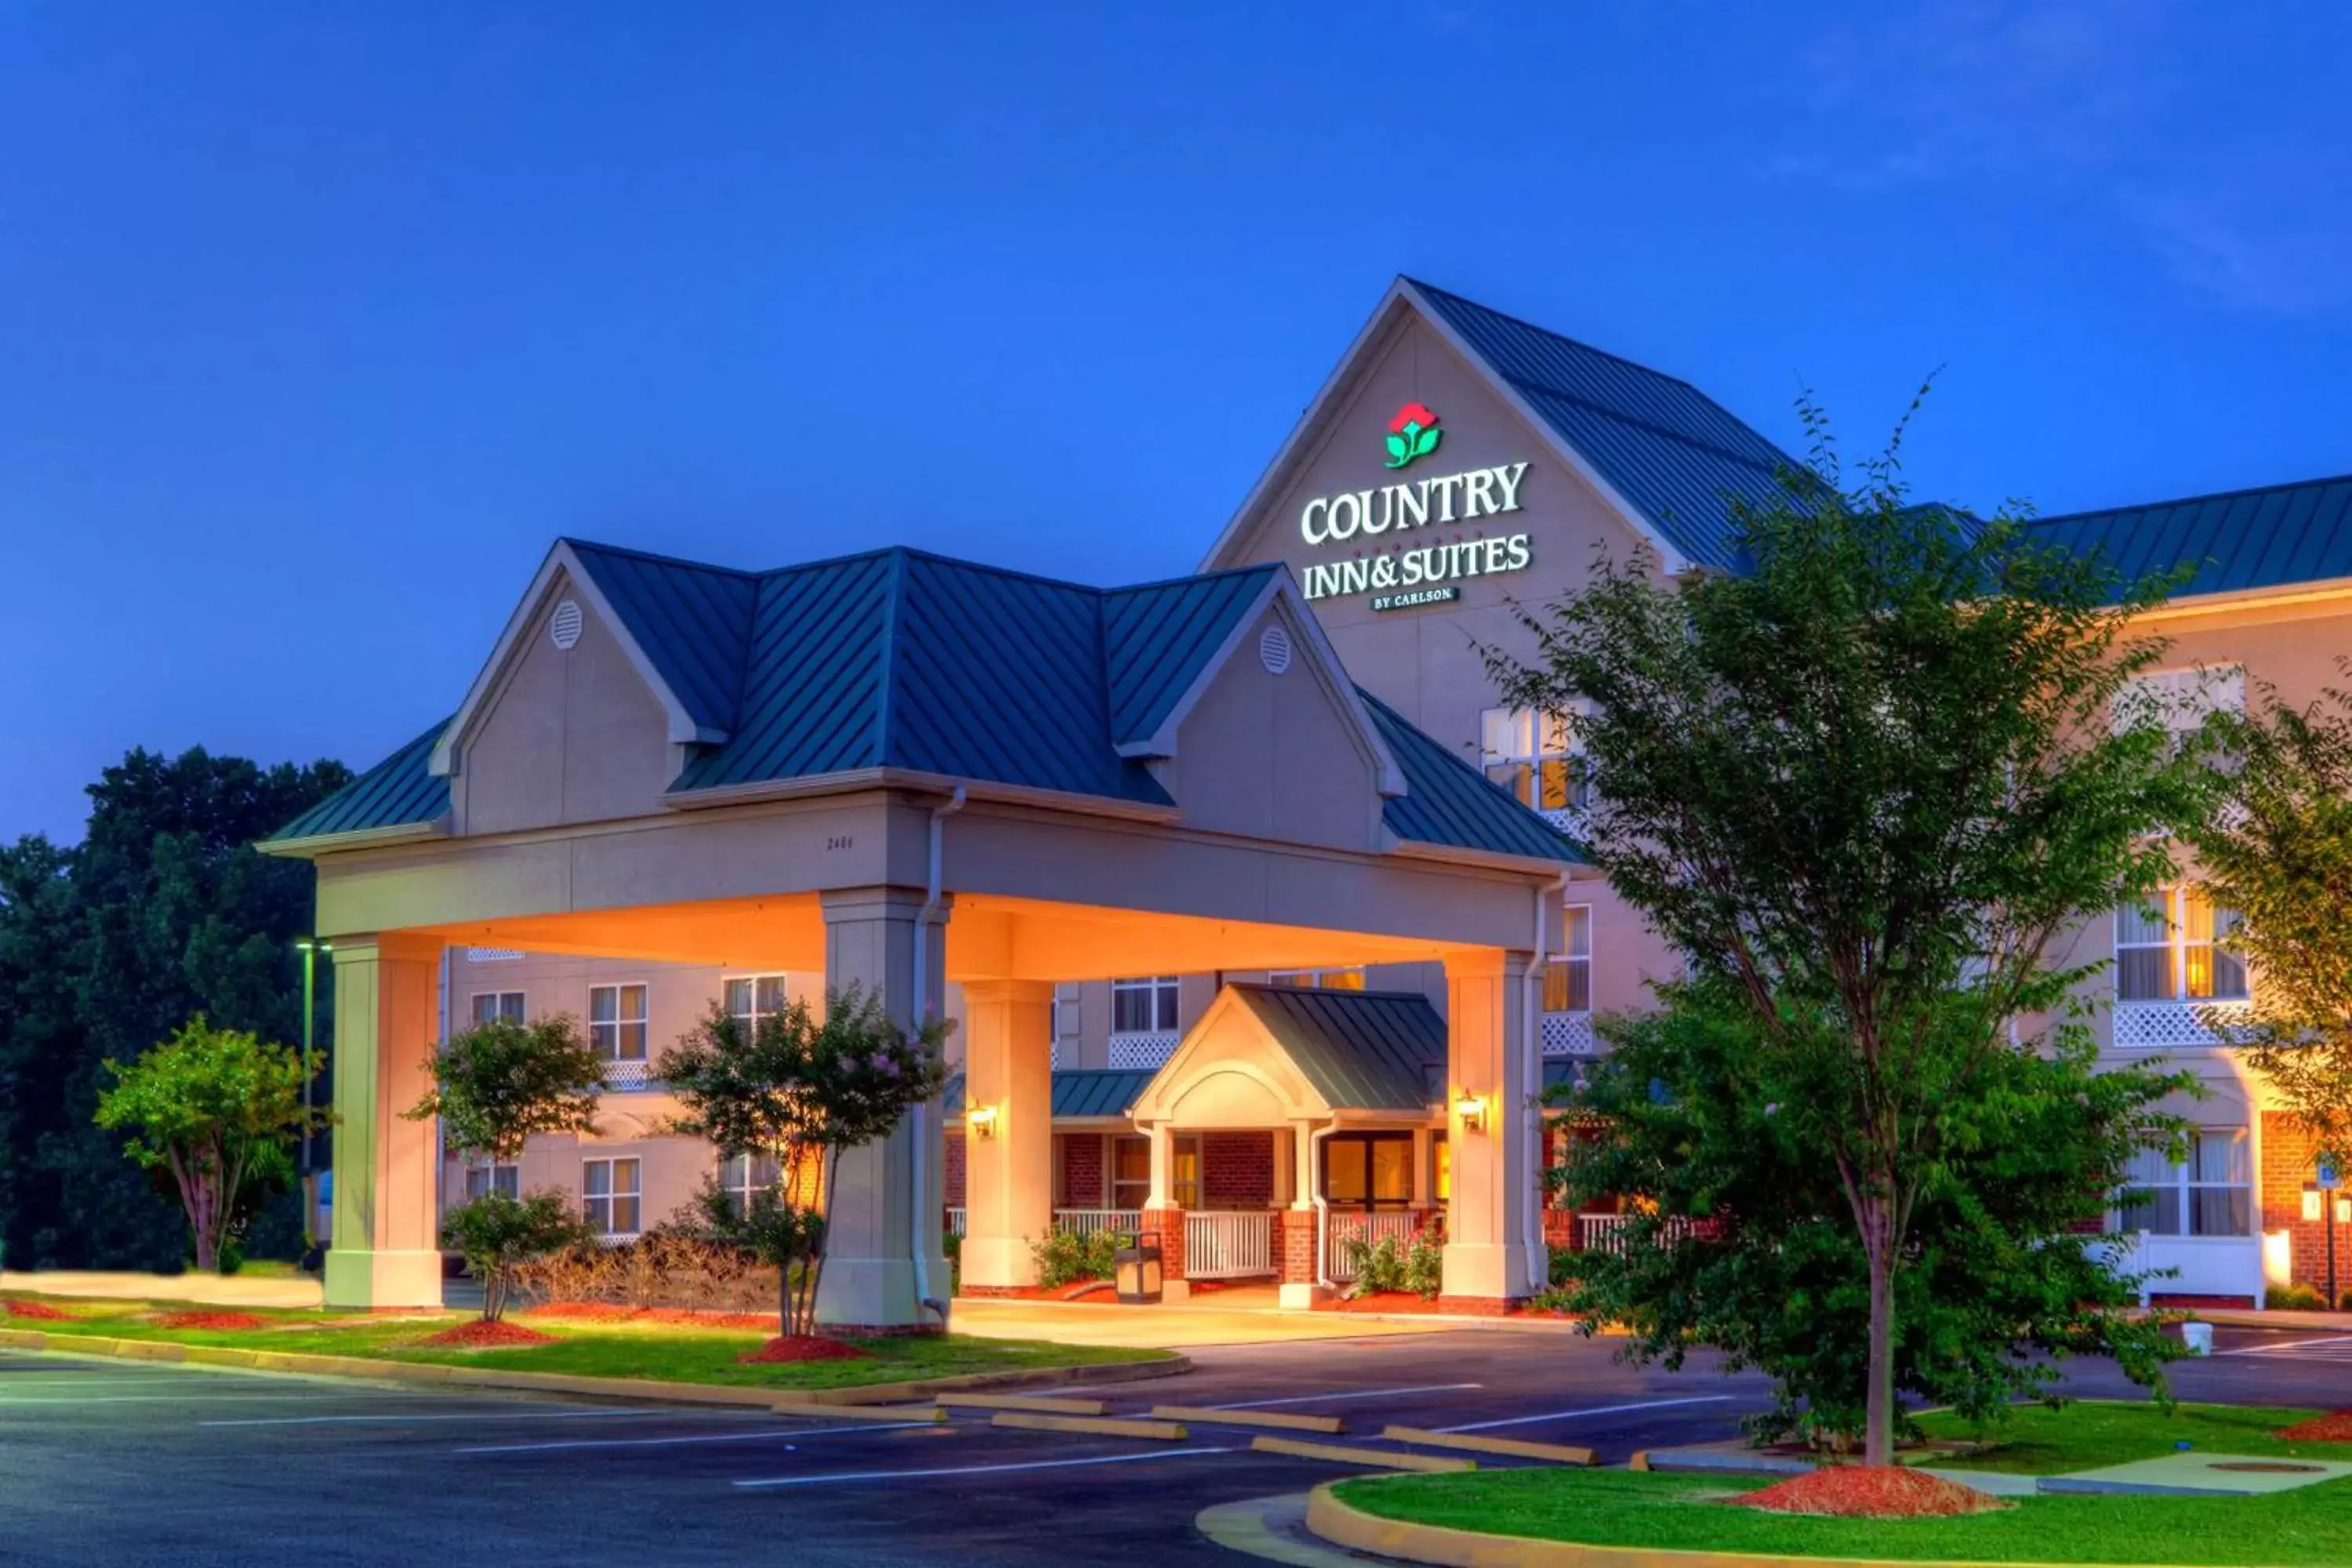 Property Building in Country Inn & Suites by Radisson, Chester, VA